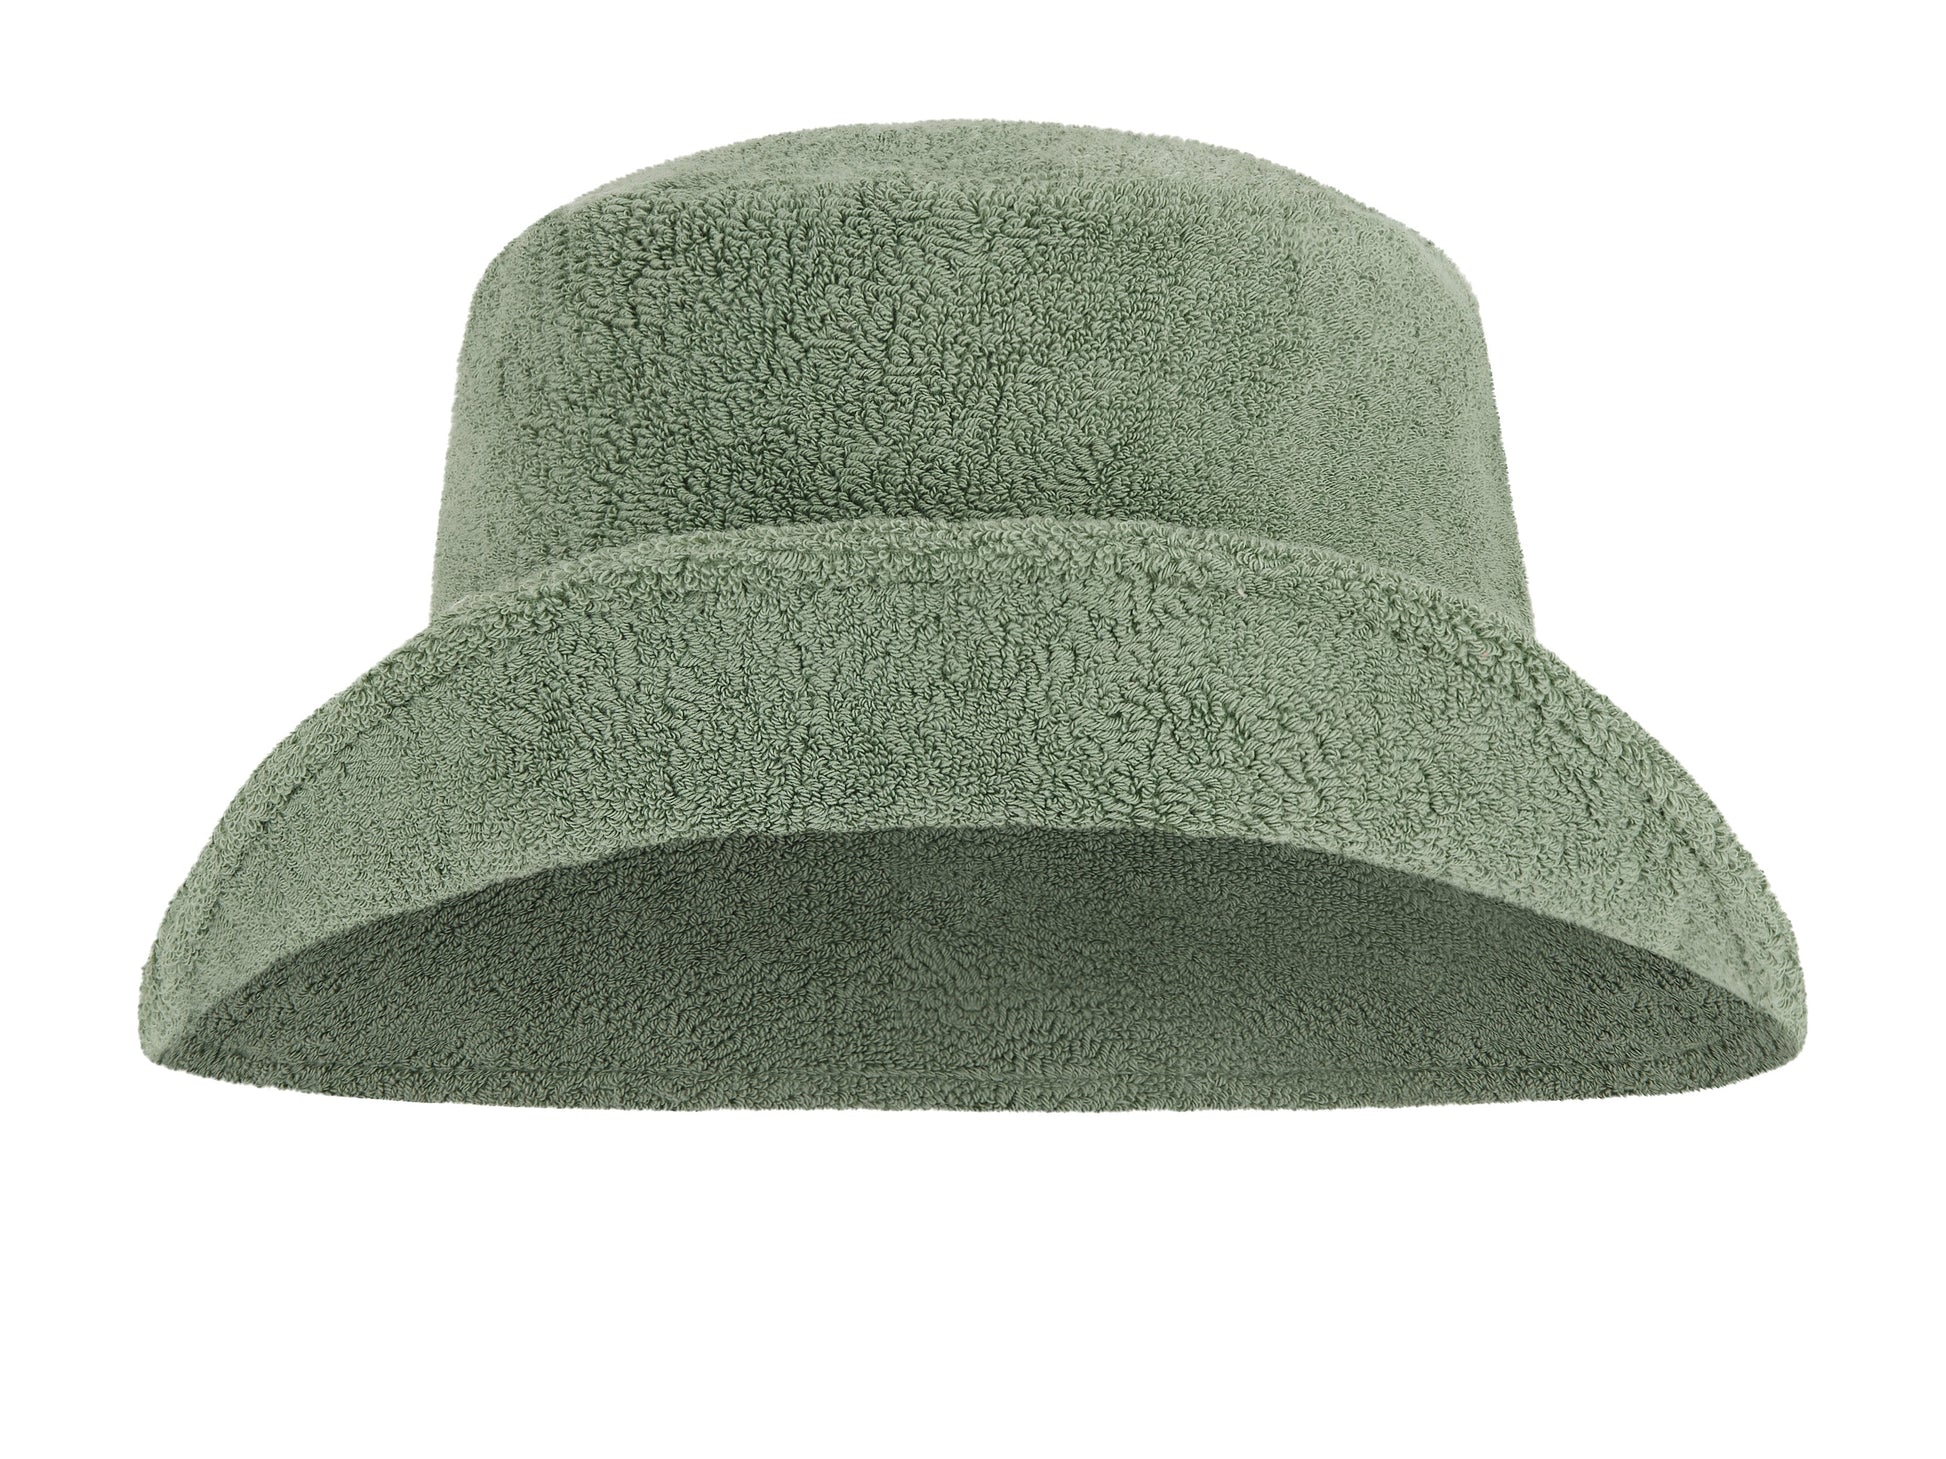 Sunday Supply Co. Tallow Terry Towelling Beach Hat | Beach Bucket Hat